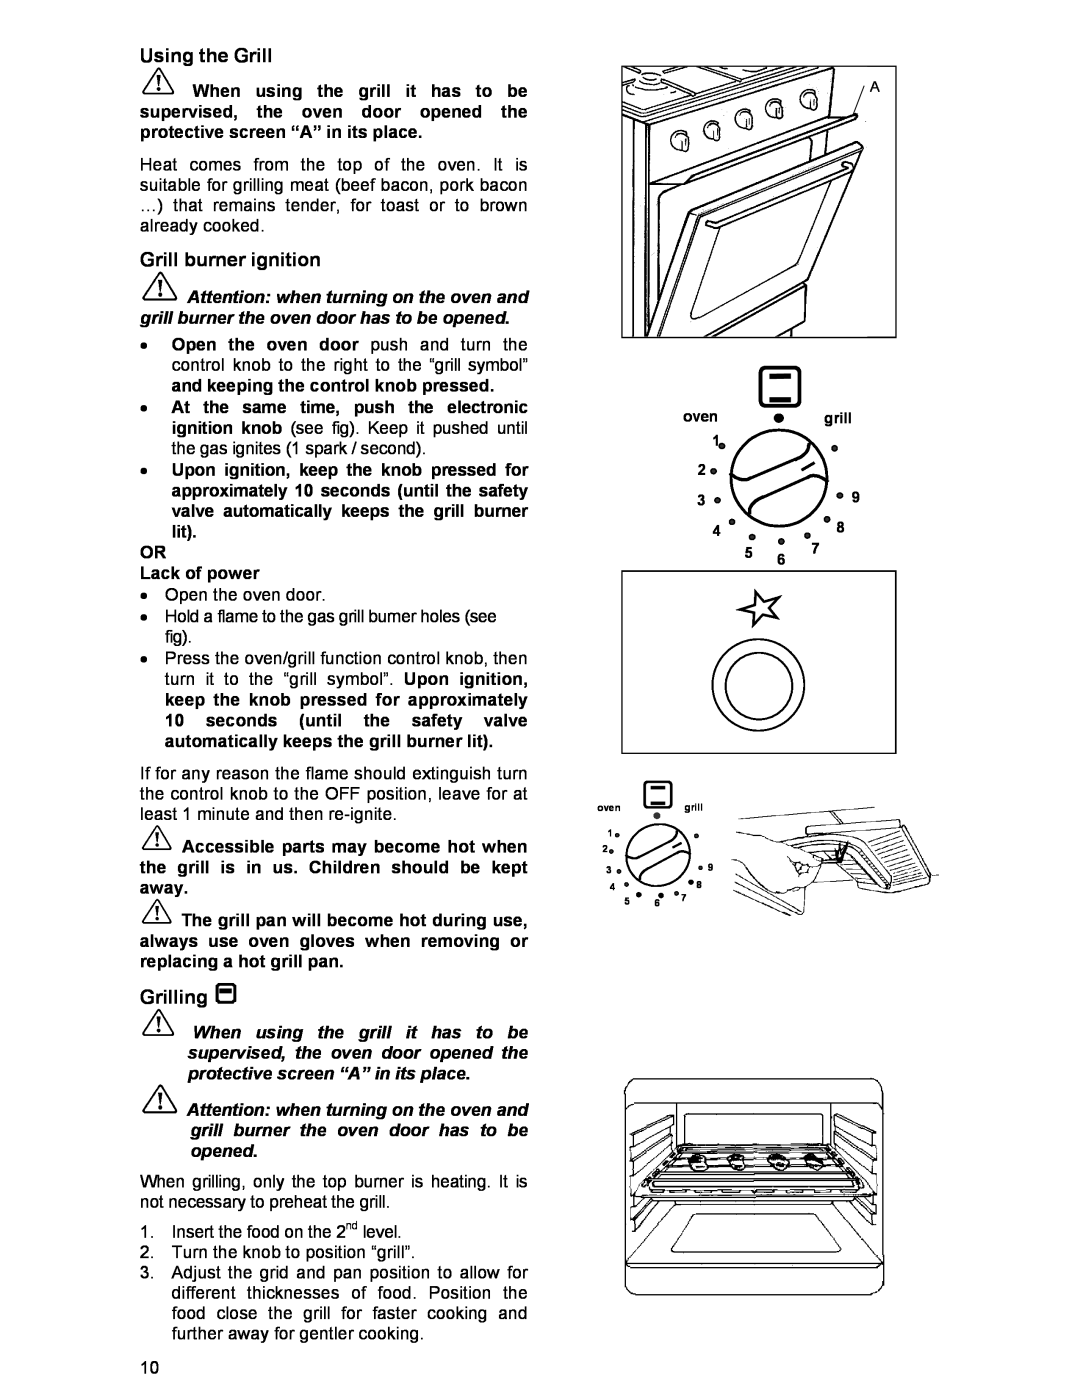 Moffat GSC 5061 manual Using the Grill, Grill burner ignition, Grilling 